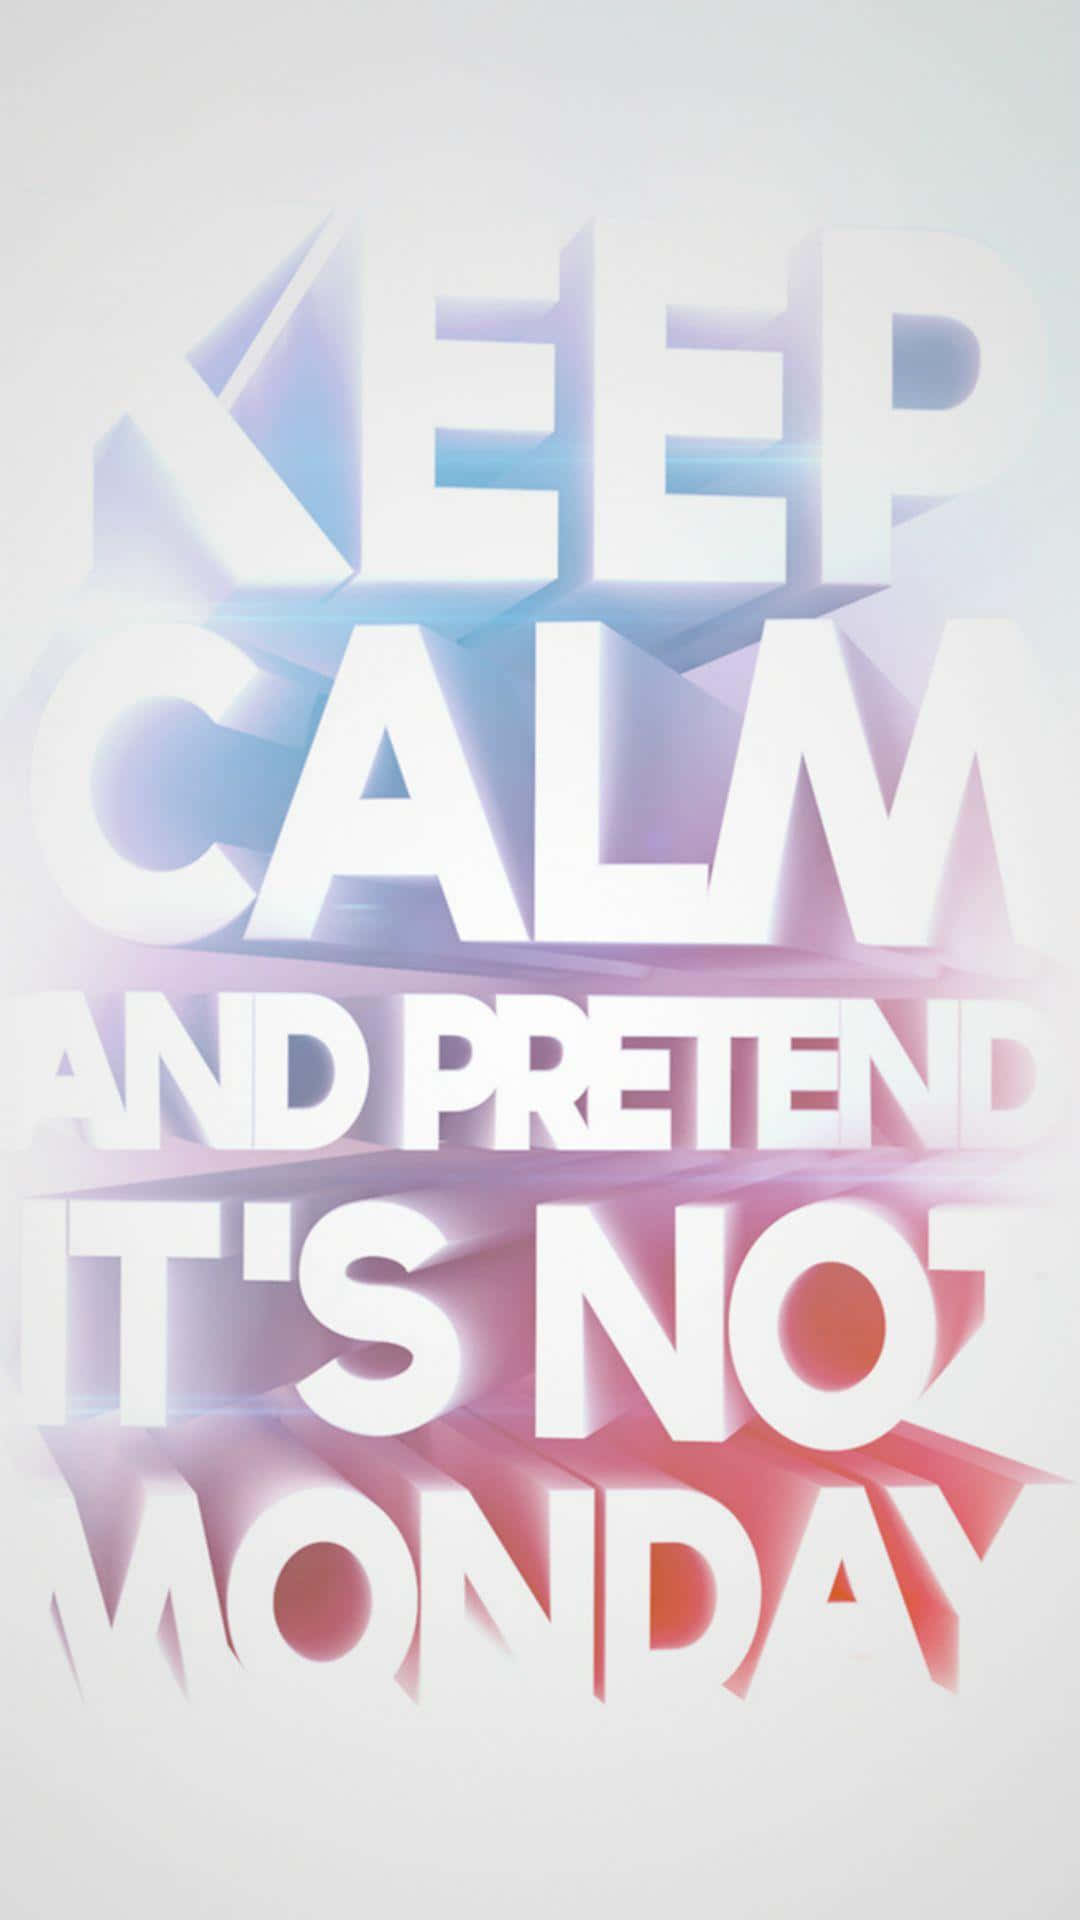 Monday Keep Calm And Pretend Typography Picture